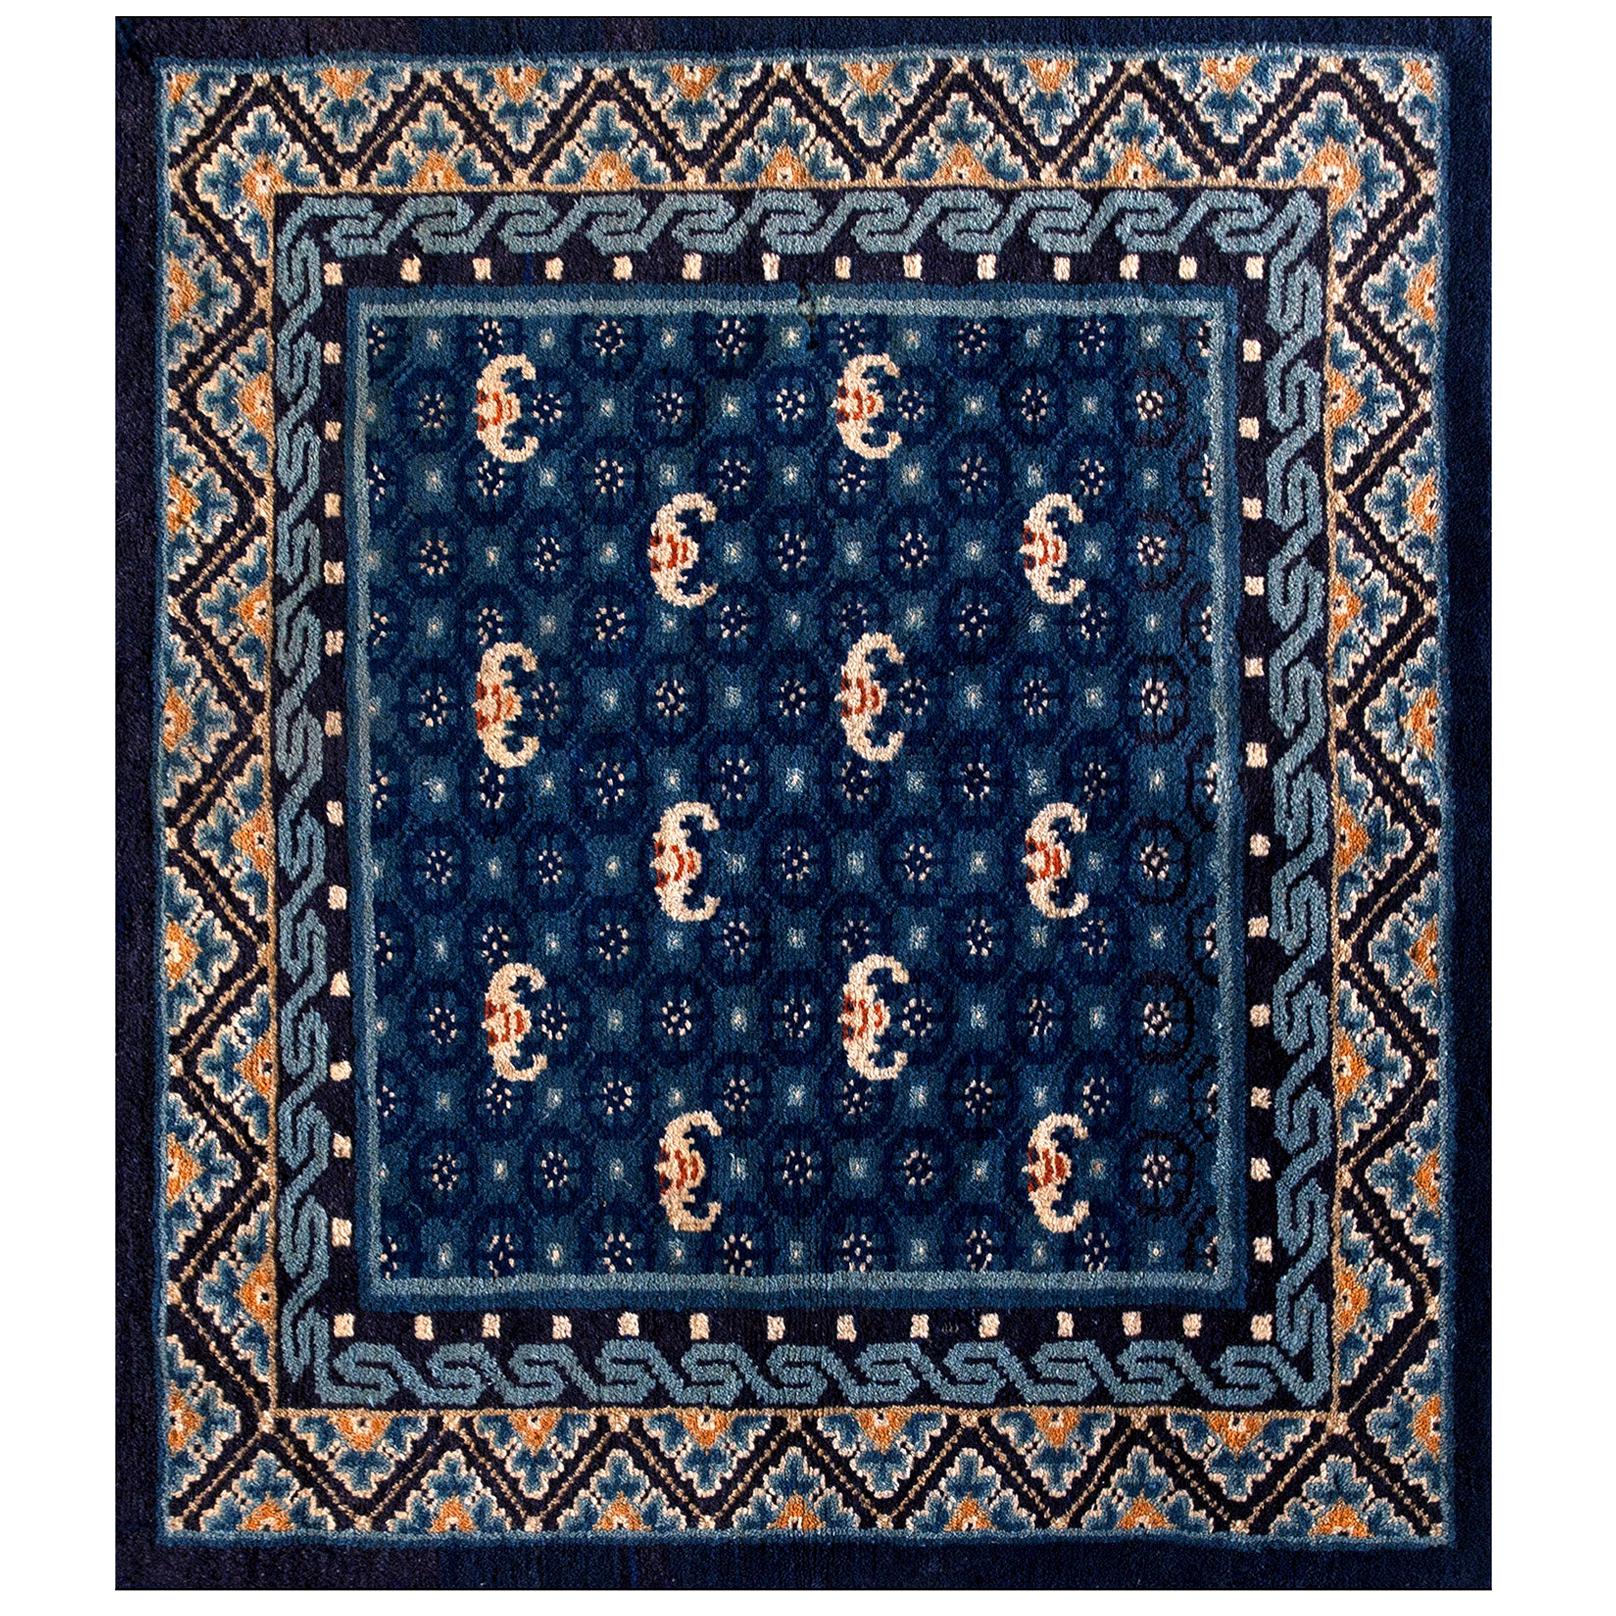 Early 20th Century Chinese Ningxia Rug ( 3' x 3'2" - 90 x 98 )